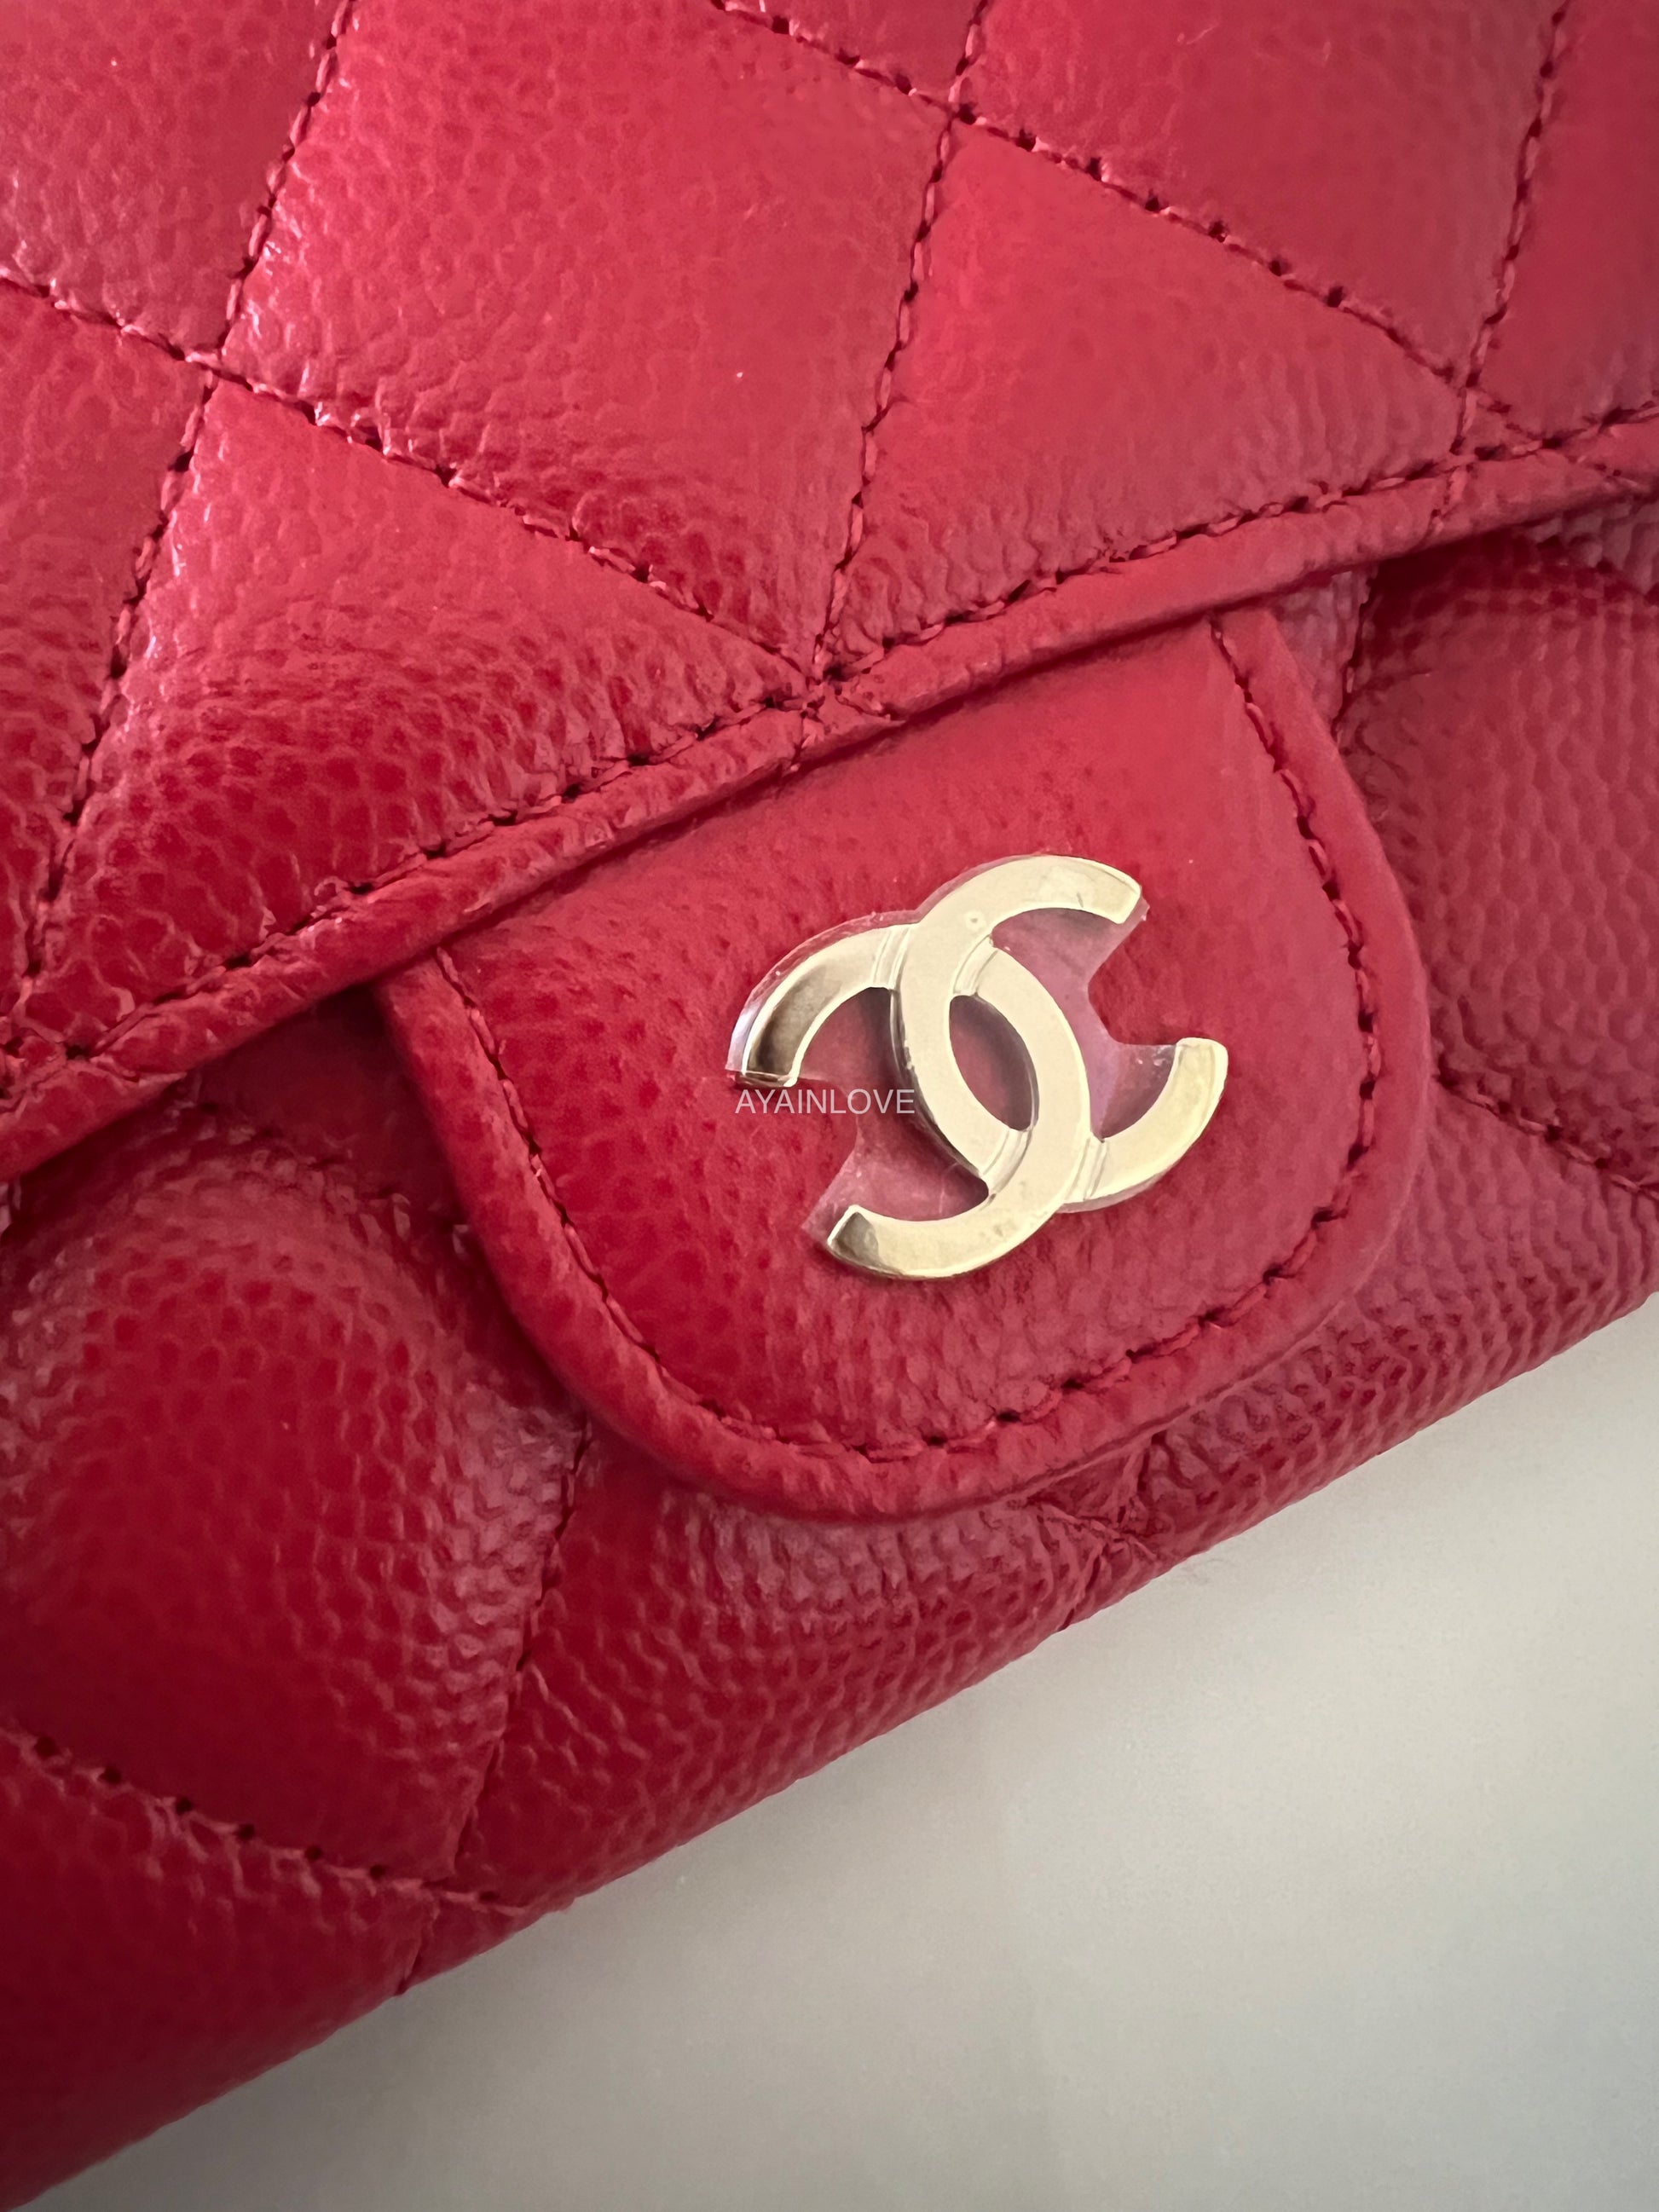 CHANEL 22P Red Caviar Snap Card Holder Light Gold Hardware